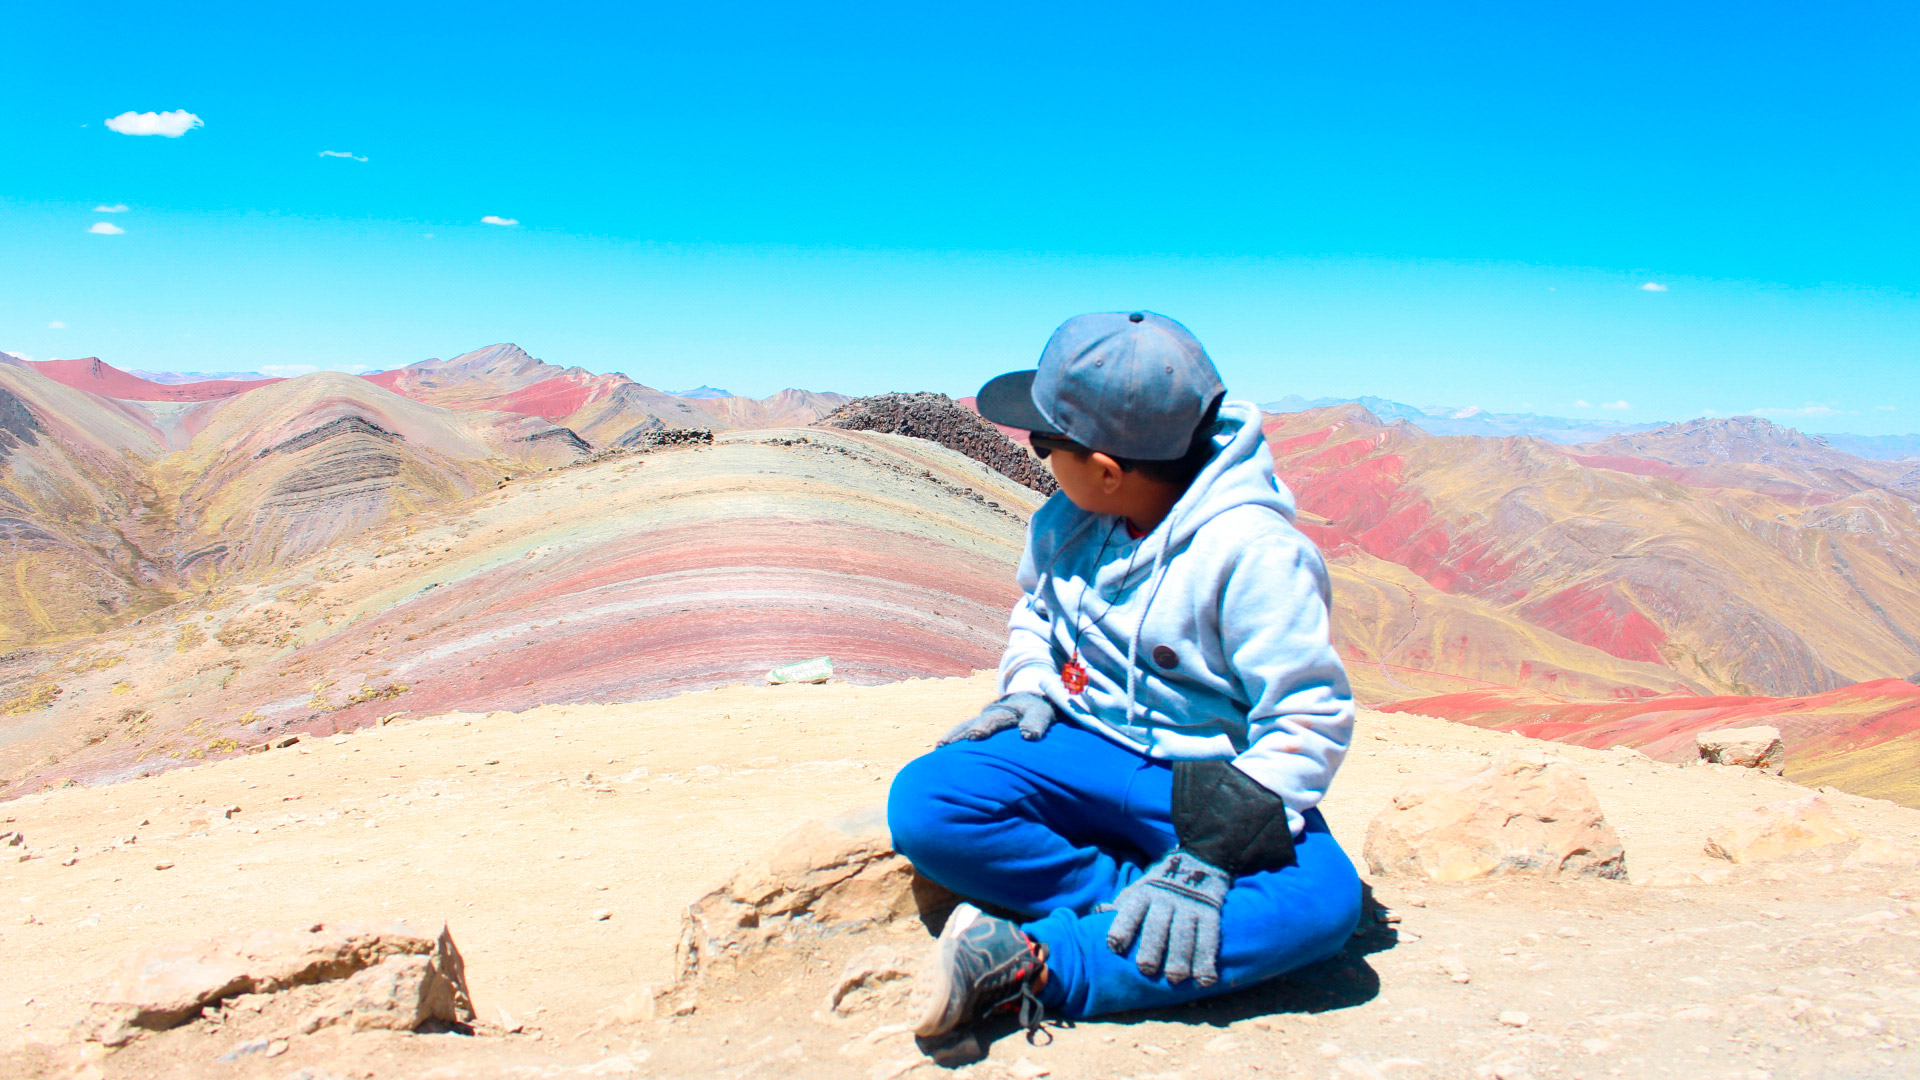 about vinicunca and palcoyo